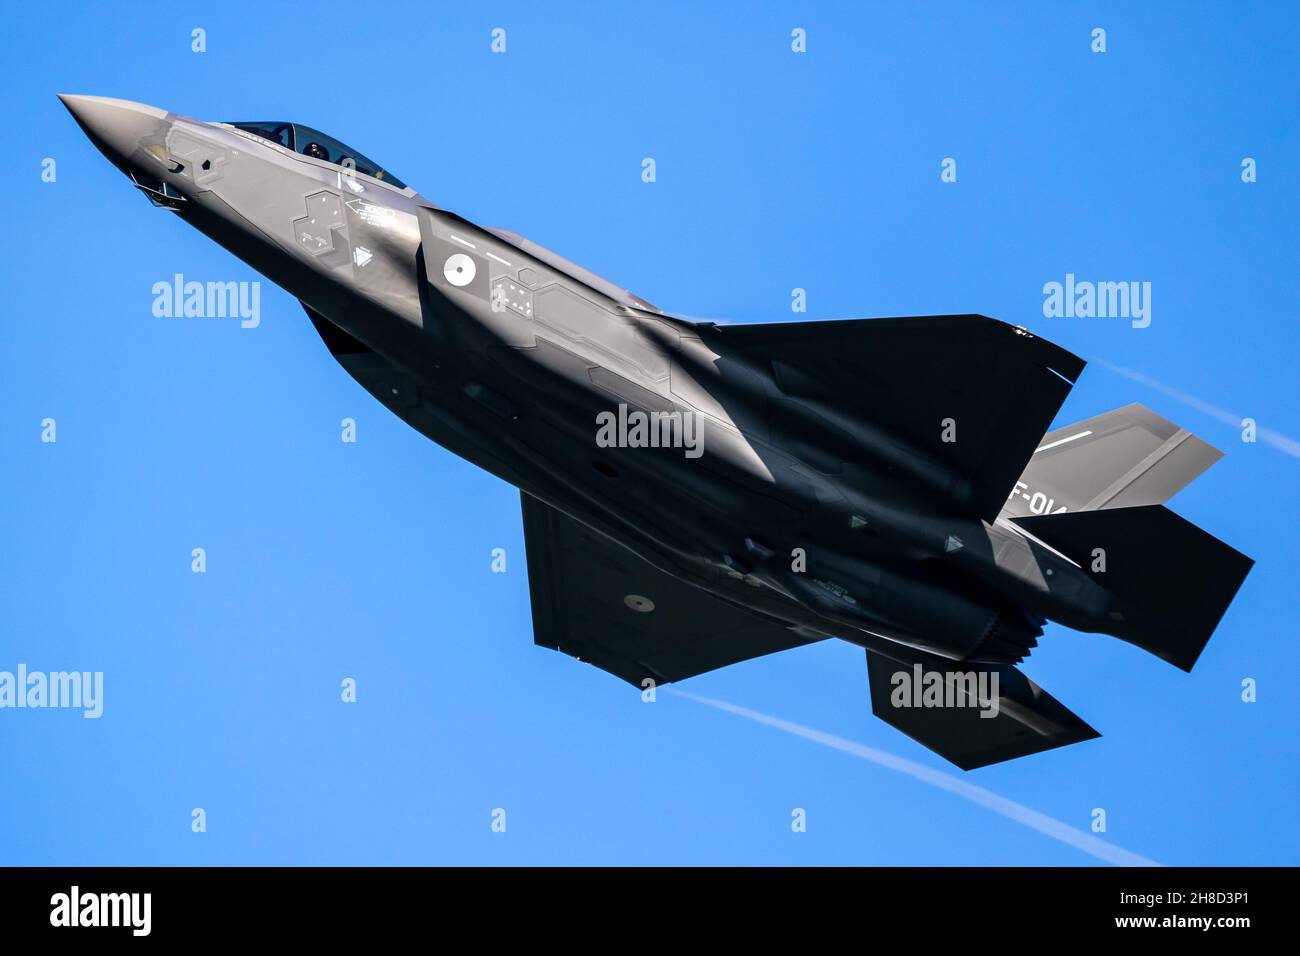 Lockheed Martin F-35 Lightning II stealth multirole combat aircraft from the Royal Netherlands Air Force taking off from Leeuwarden Air Base. October Stock Photo